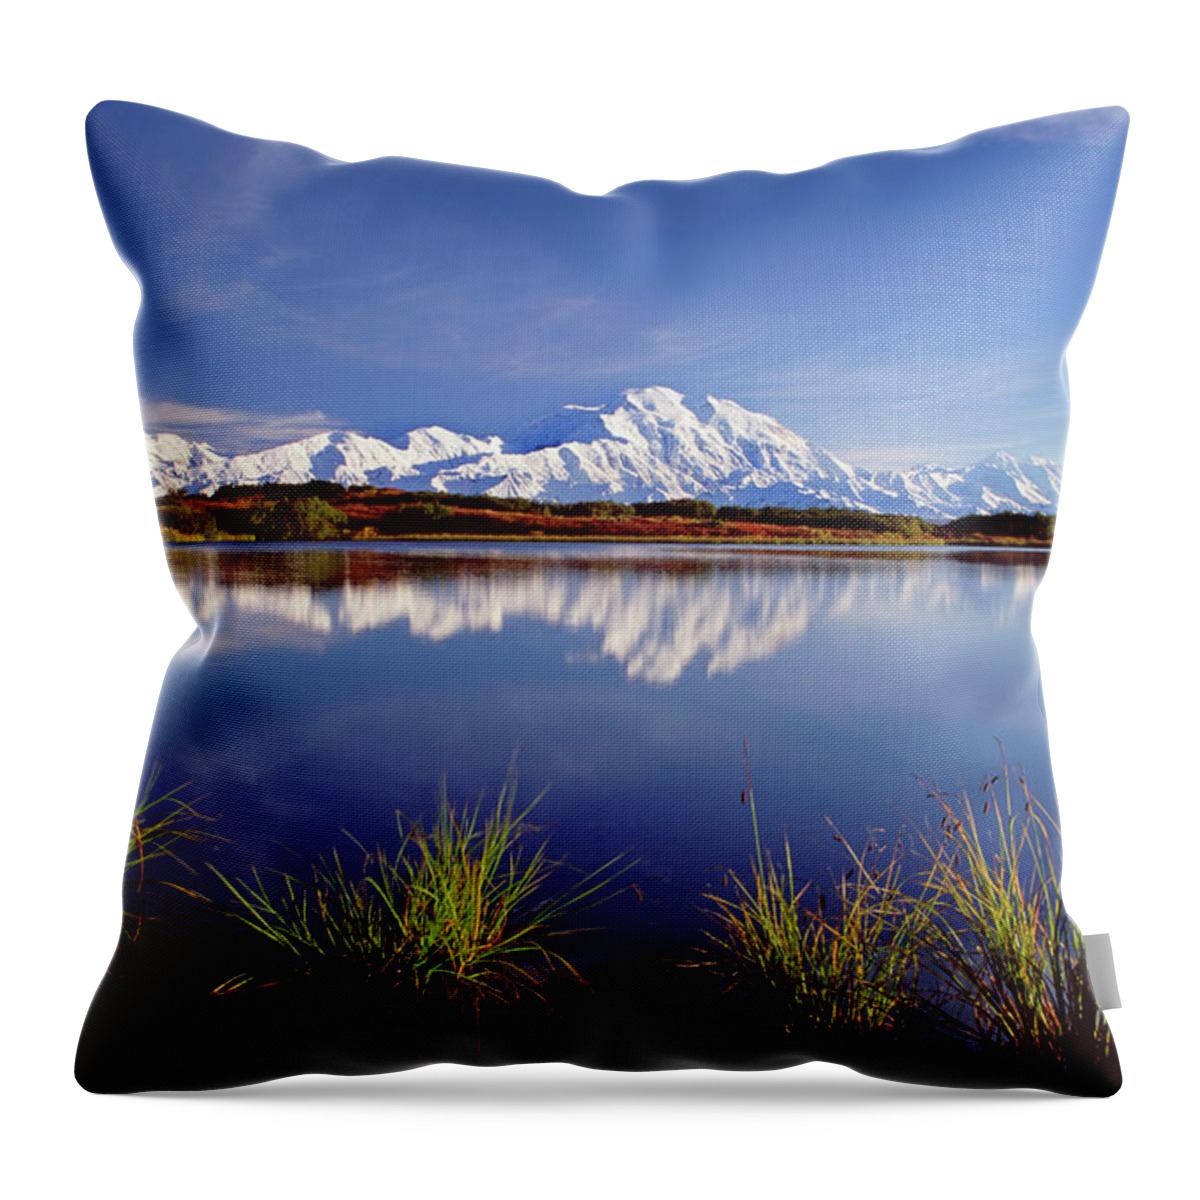 Tranquility Throw Pillow featuring the photograph Mount Mckinley In Denali National Park by Mint Images - David Schultz